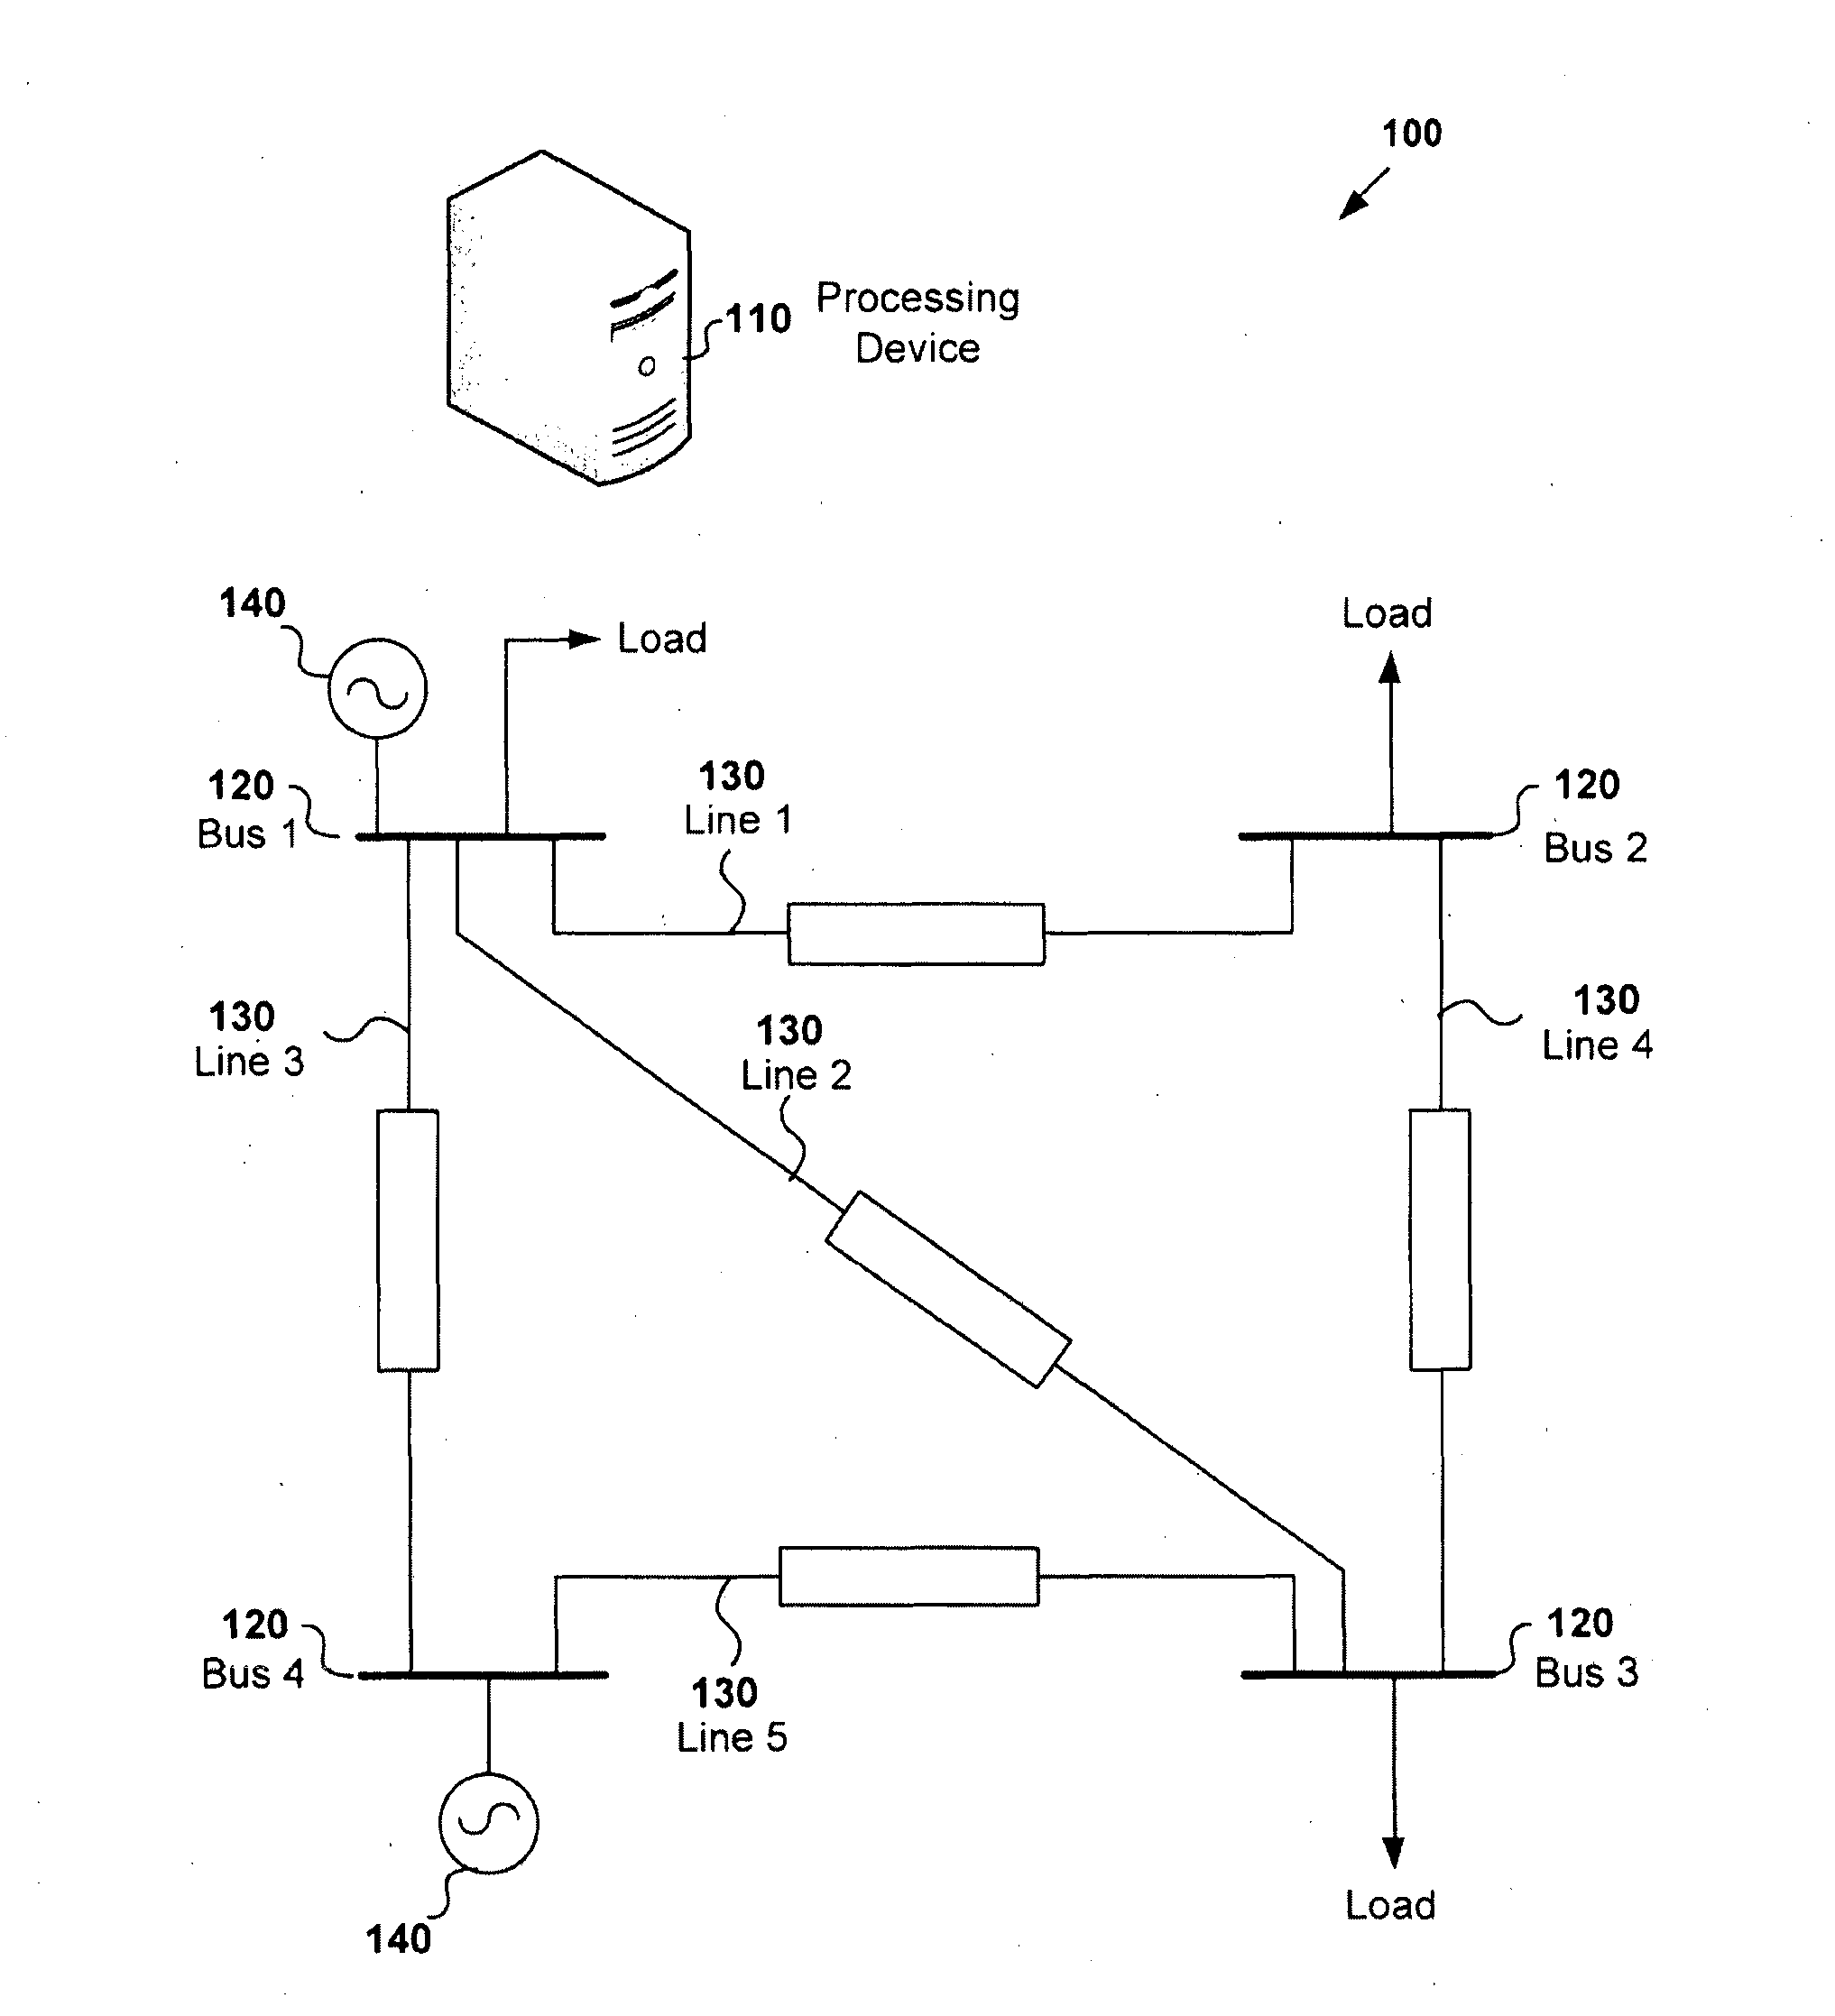 Alternating current (AC) power flow analysis in an electrical power network